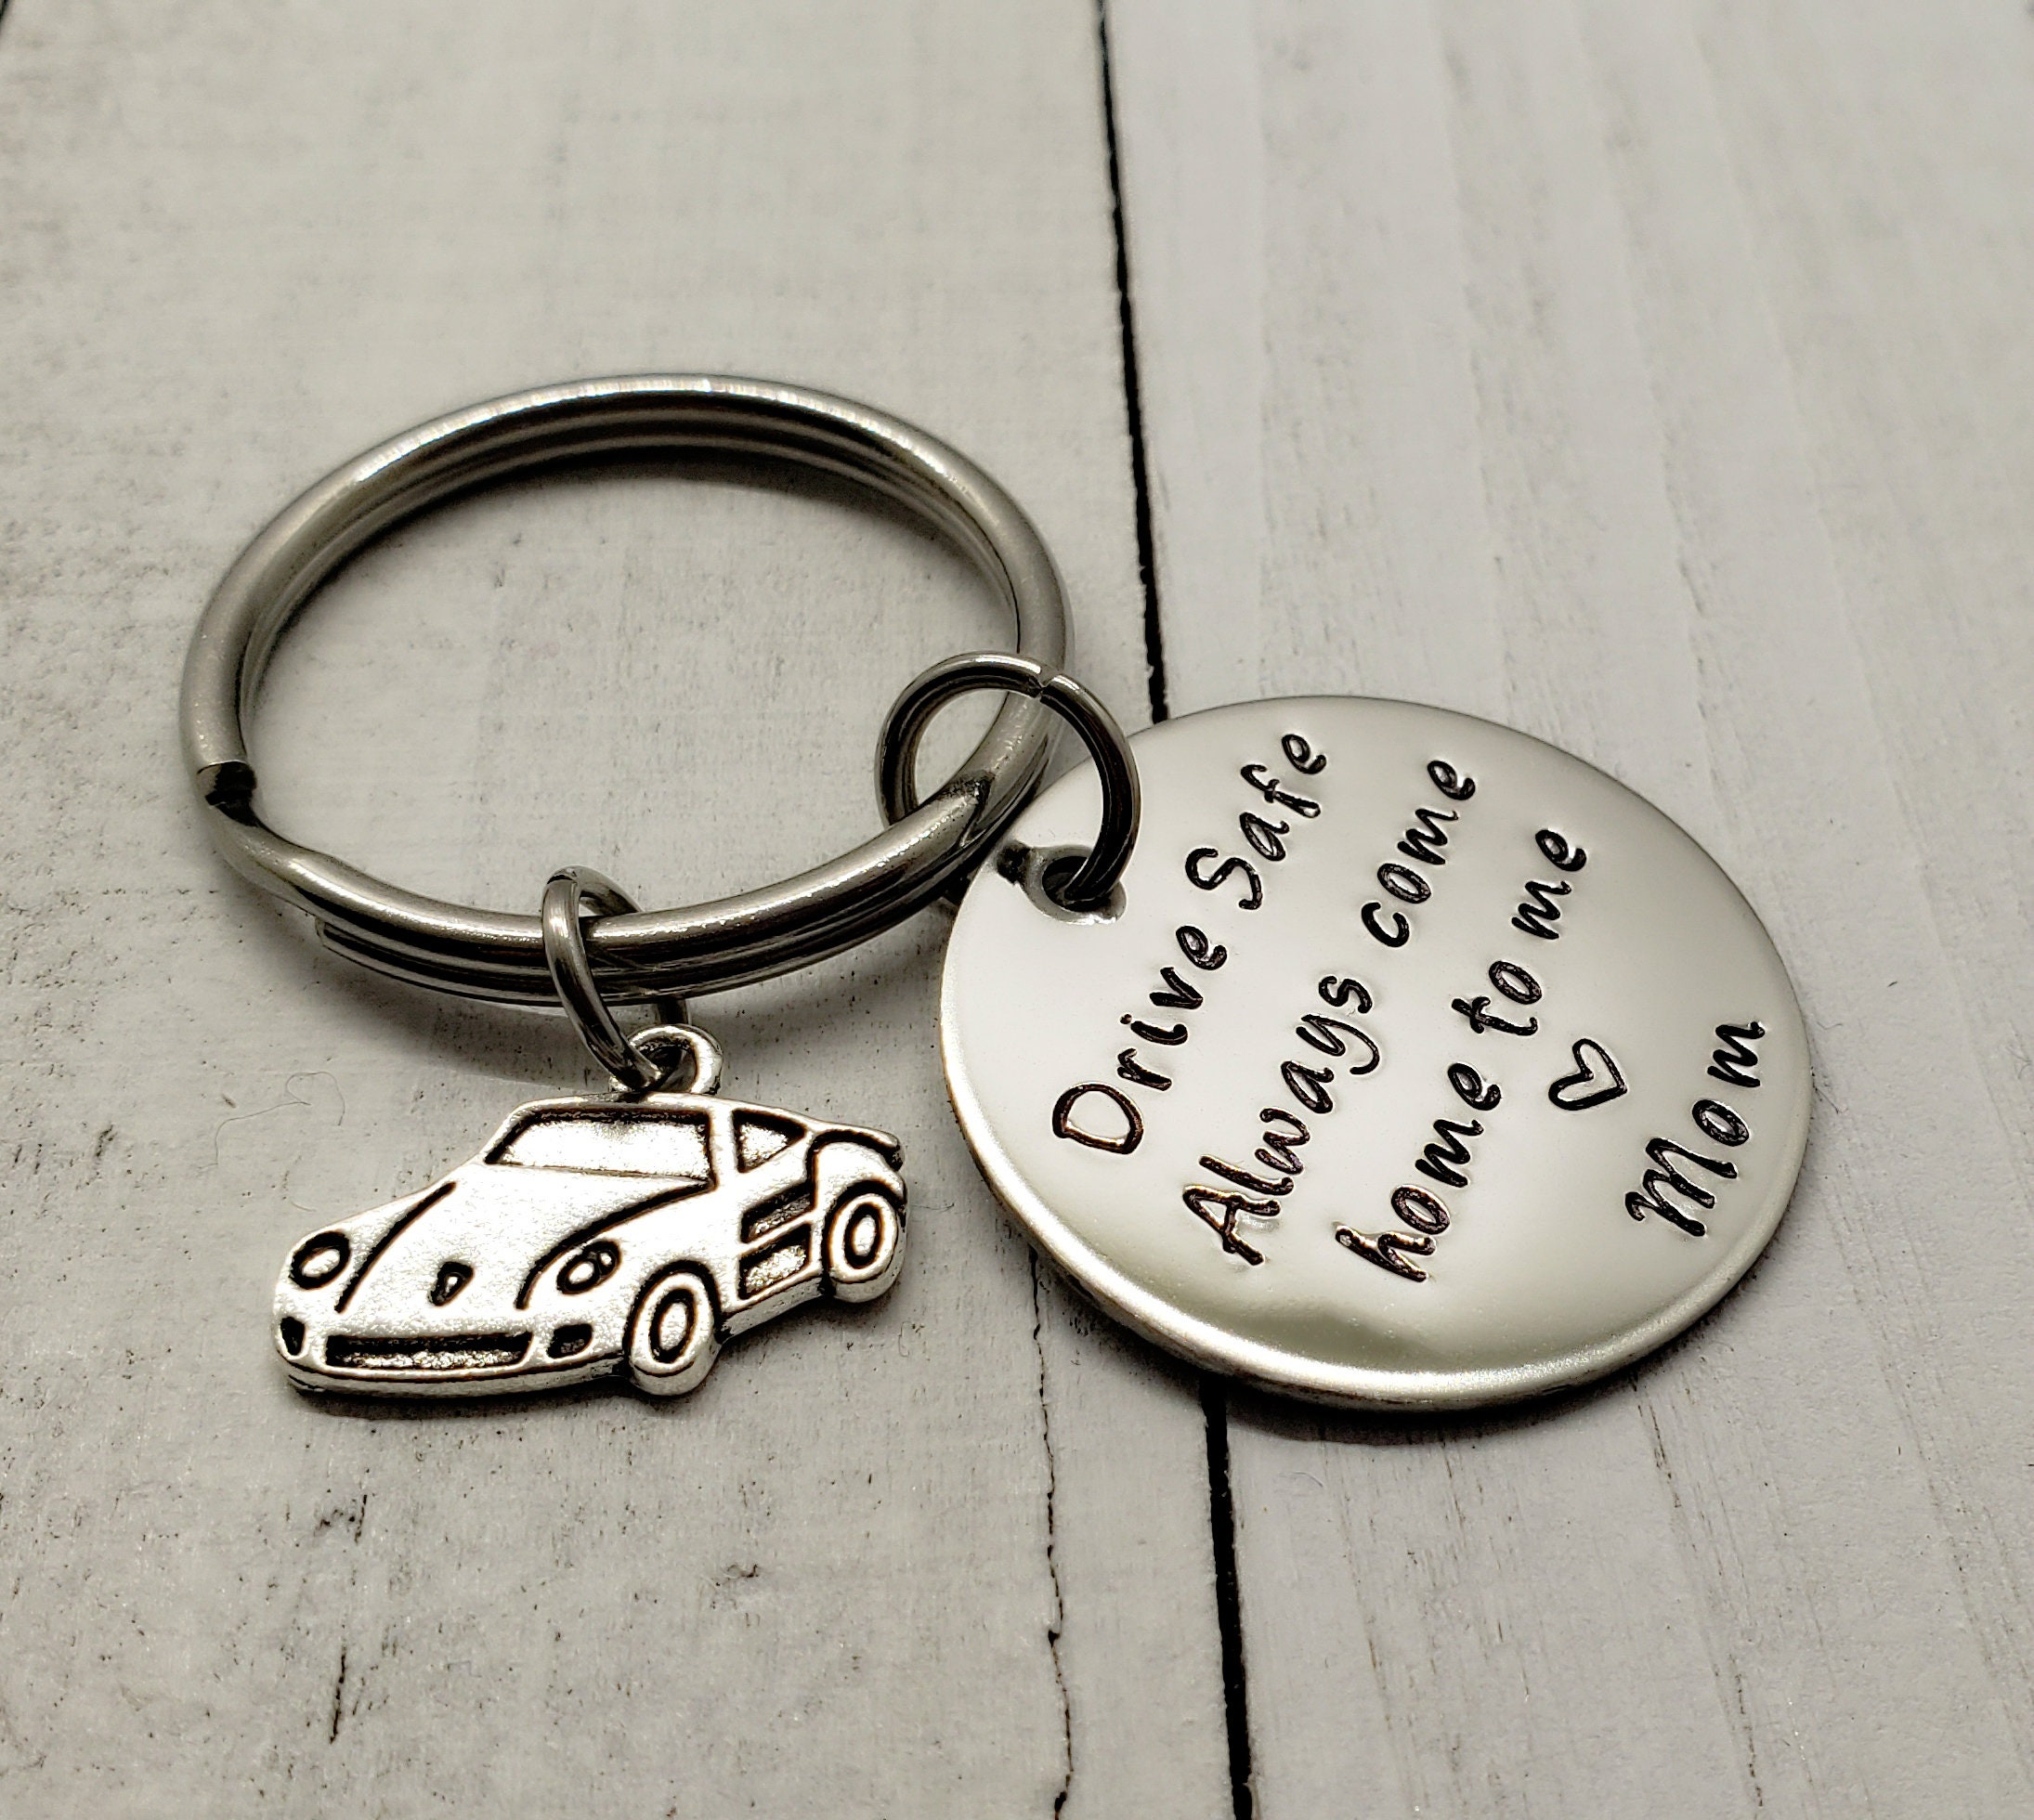 Drive Safe Keychain, Car Charm Keychain, Always Come Home to Me Keychain,  First Driver Gift, New Driver Be Safe, Come Home Safe Keychain